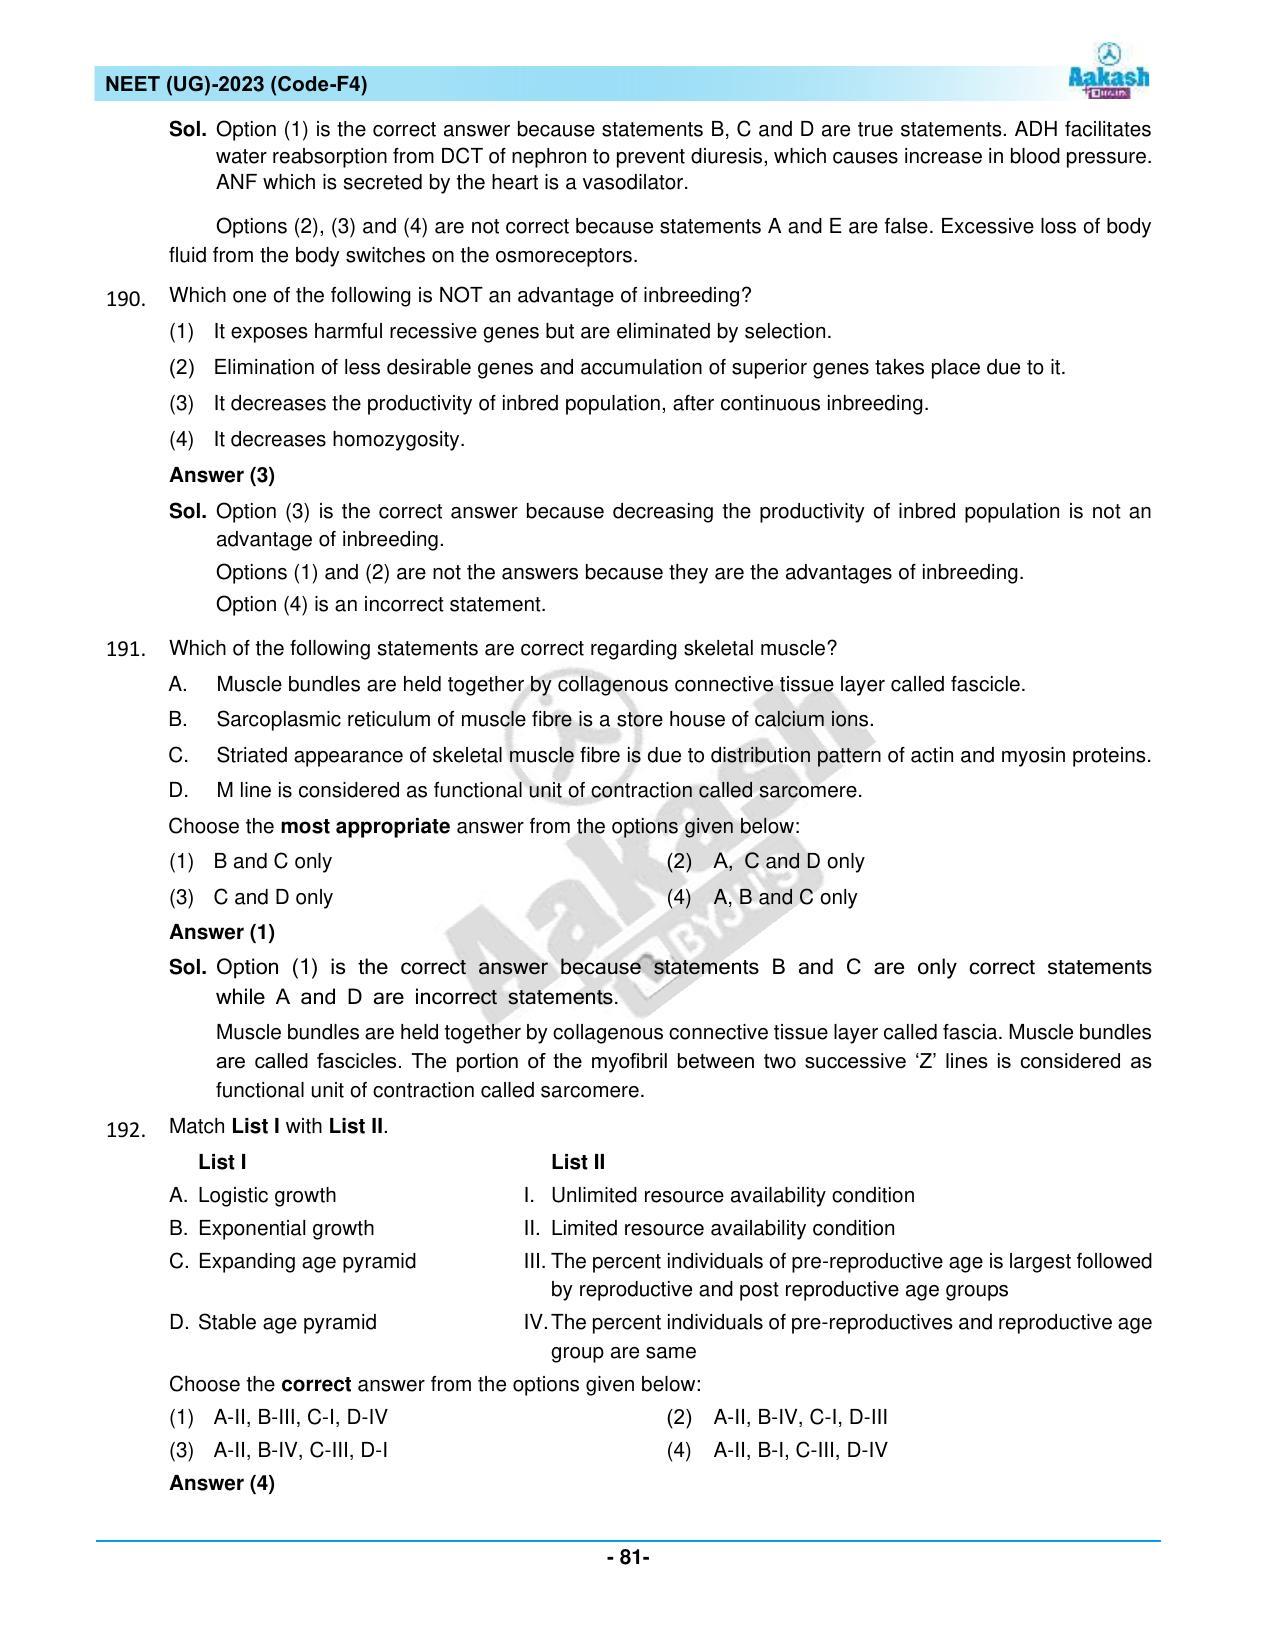 NEET 2023 Question Paper F4 - Page 81